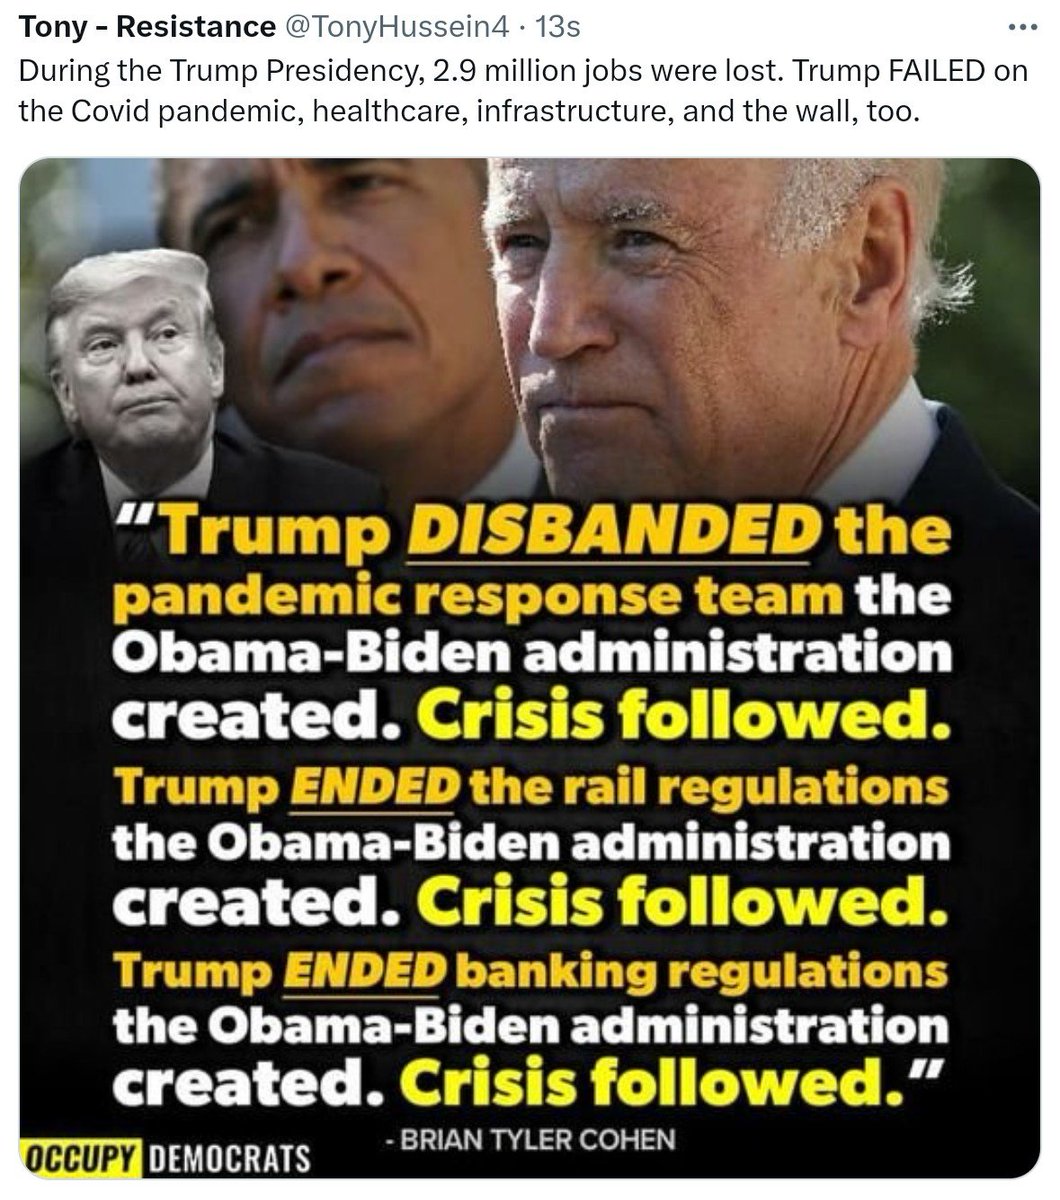 @bennyjohnson Donald Trump accomplished: Enriching himself; Killing over a Million Americans by lying about COVID & the Vaccine; Stole thousands of Top Secret Classified Documents, shared with Mar-A-Lago guests & asked for Immunity. President Biden Brought Us Back from Trump's Disastrous Rein.